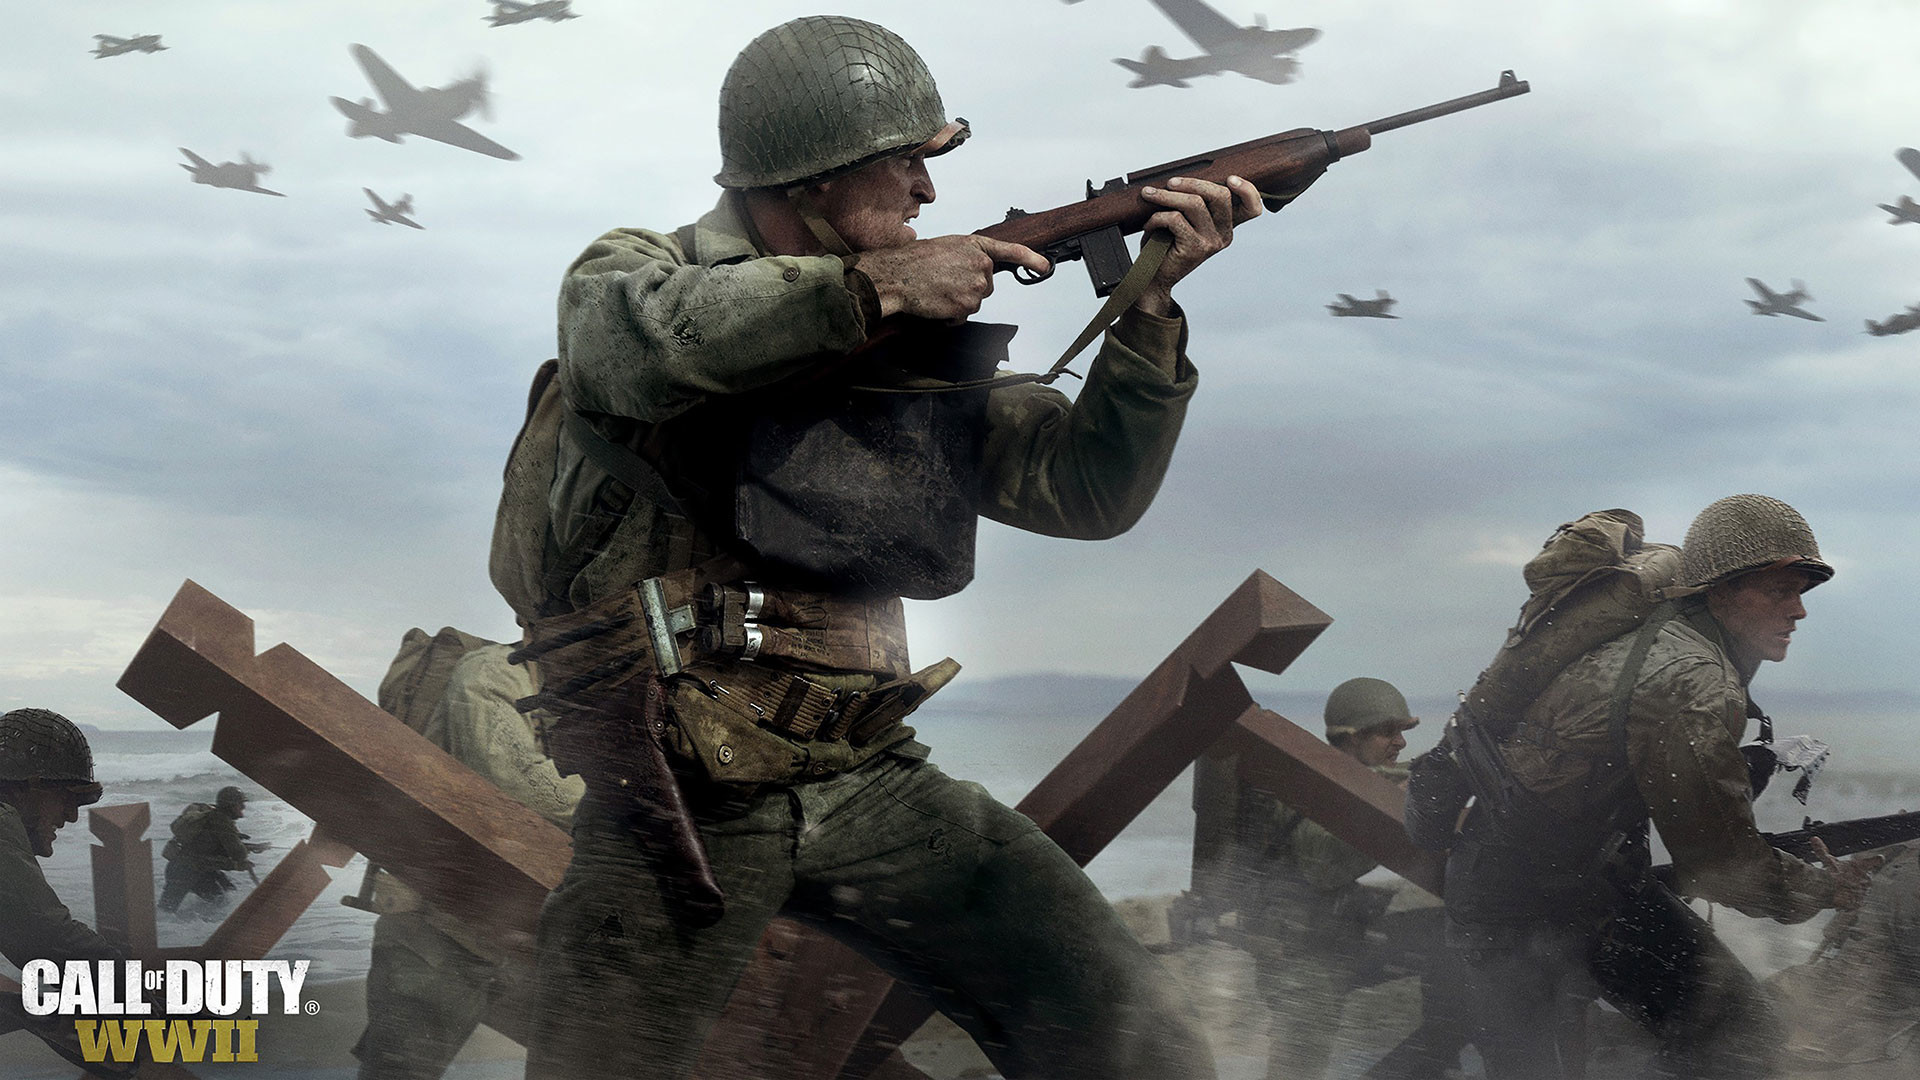 1920x1080 ... CALL OF DUTY WWII 720p Wallpaper